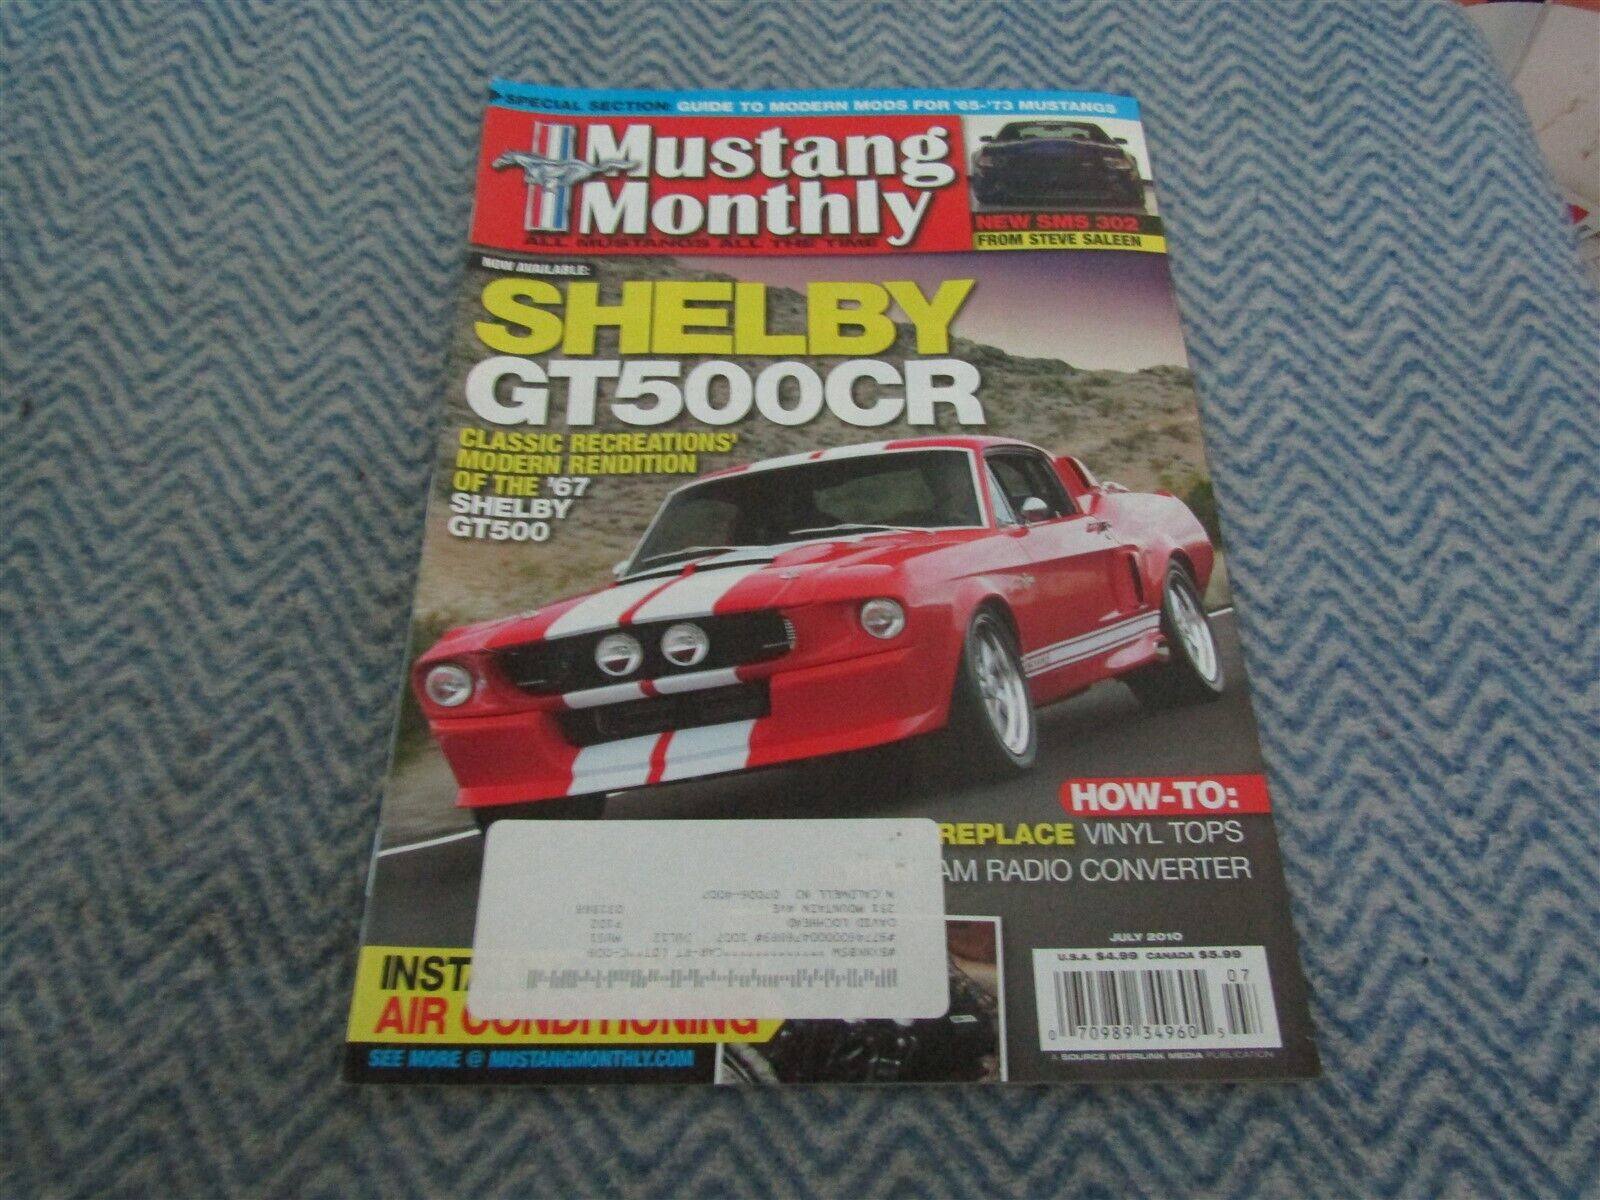 JULY 2010 MUSTANG MONTHLY MAGAZINE SHELBY GT500CR CLASSIC '67 SHELBY GT500